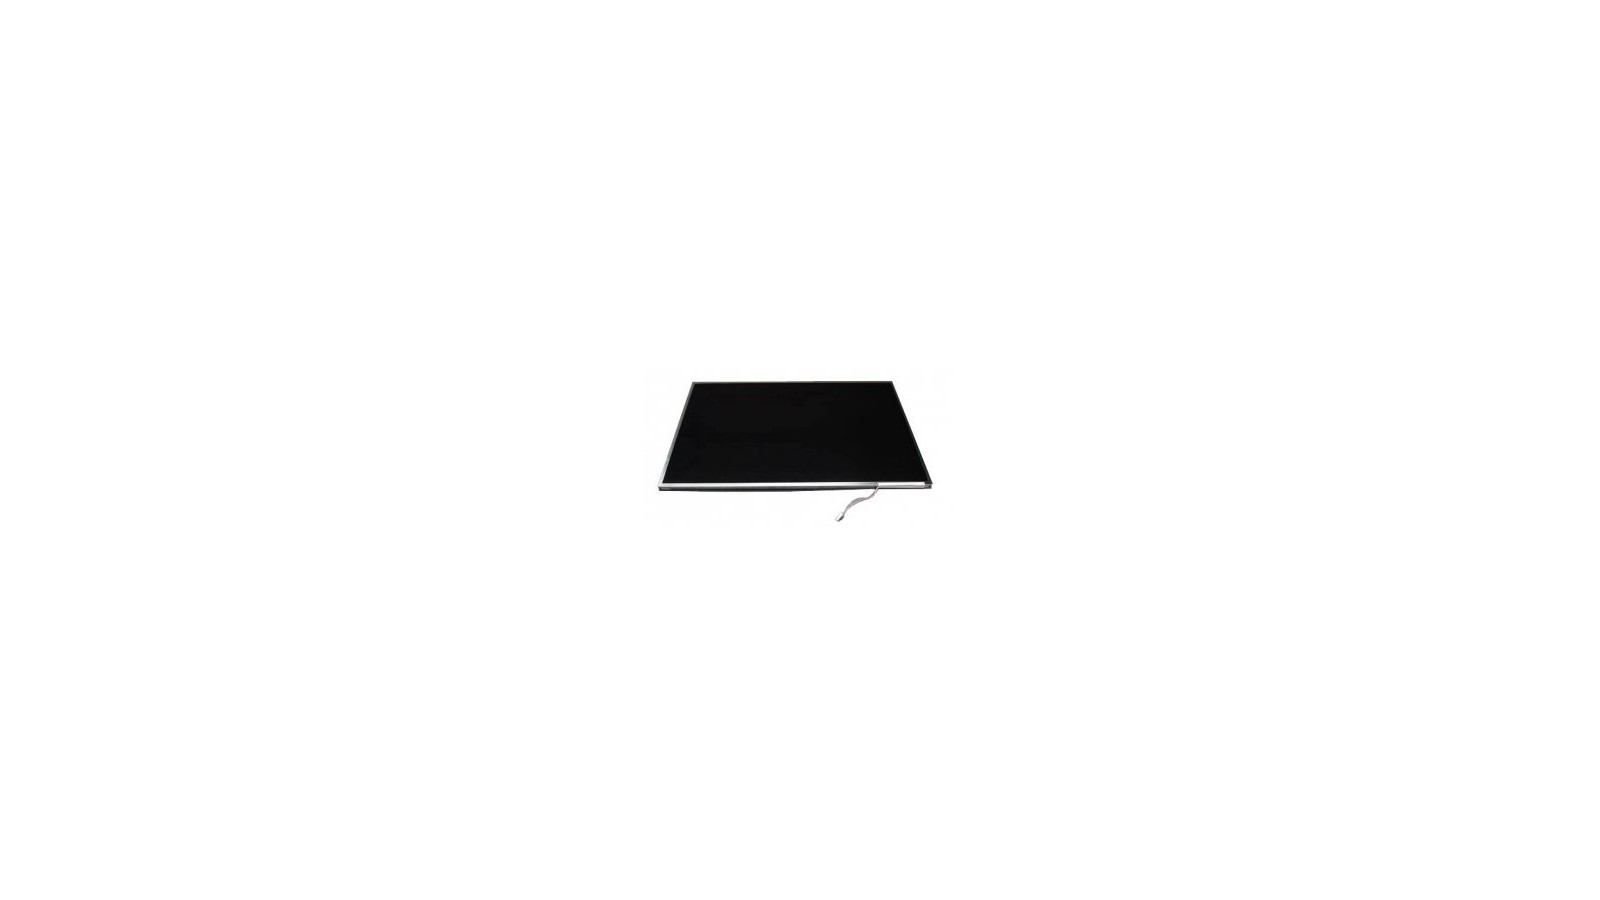 Sostituzione display 17" Sony Vaio VGN-A73S VGN-A72S